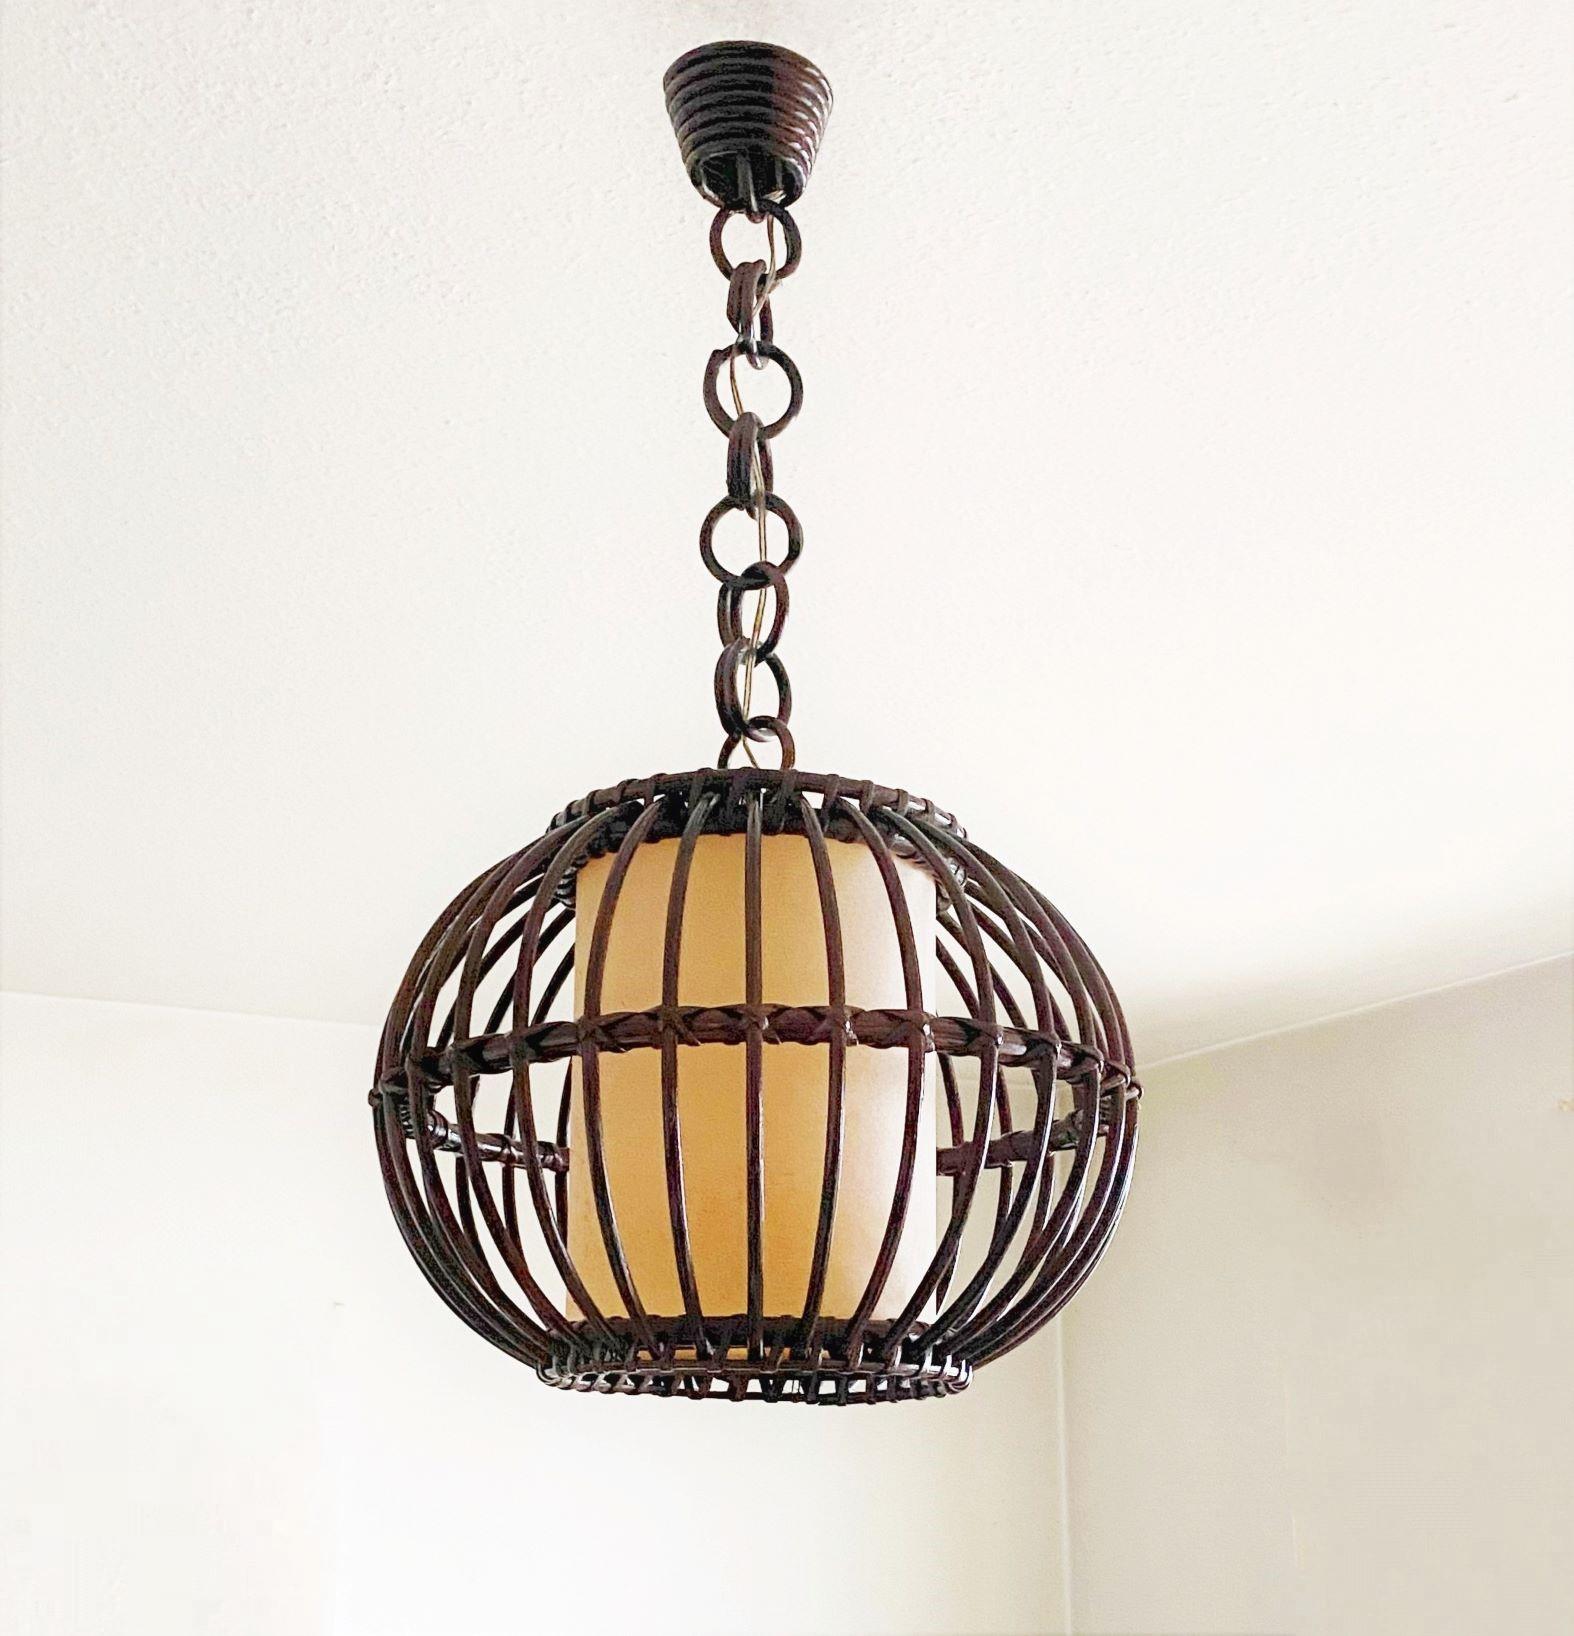 Mid-Century bamboo and rattan globe pendant or Lantern by Louis Sognot, France, 1950s. This beautiful suspension light is entirely handcrafted in bamboo and rattan, with a central cylinder parchment lamp shade provinding a warm and pleasant light.